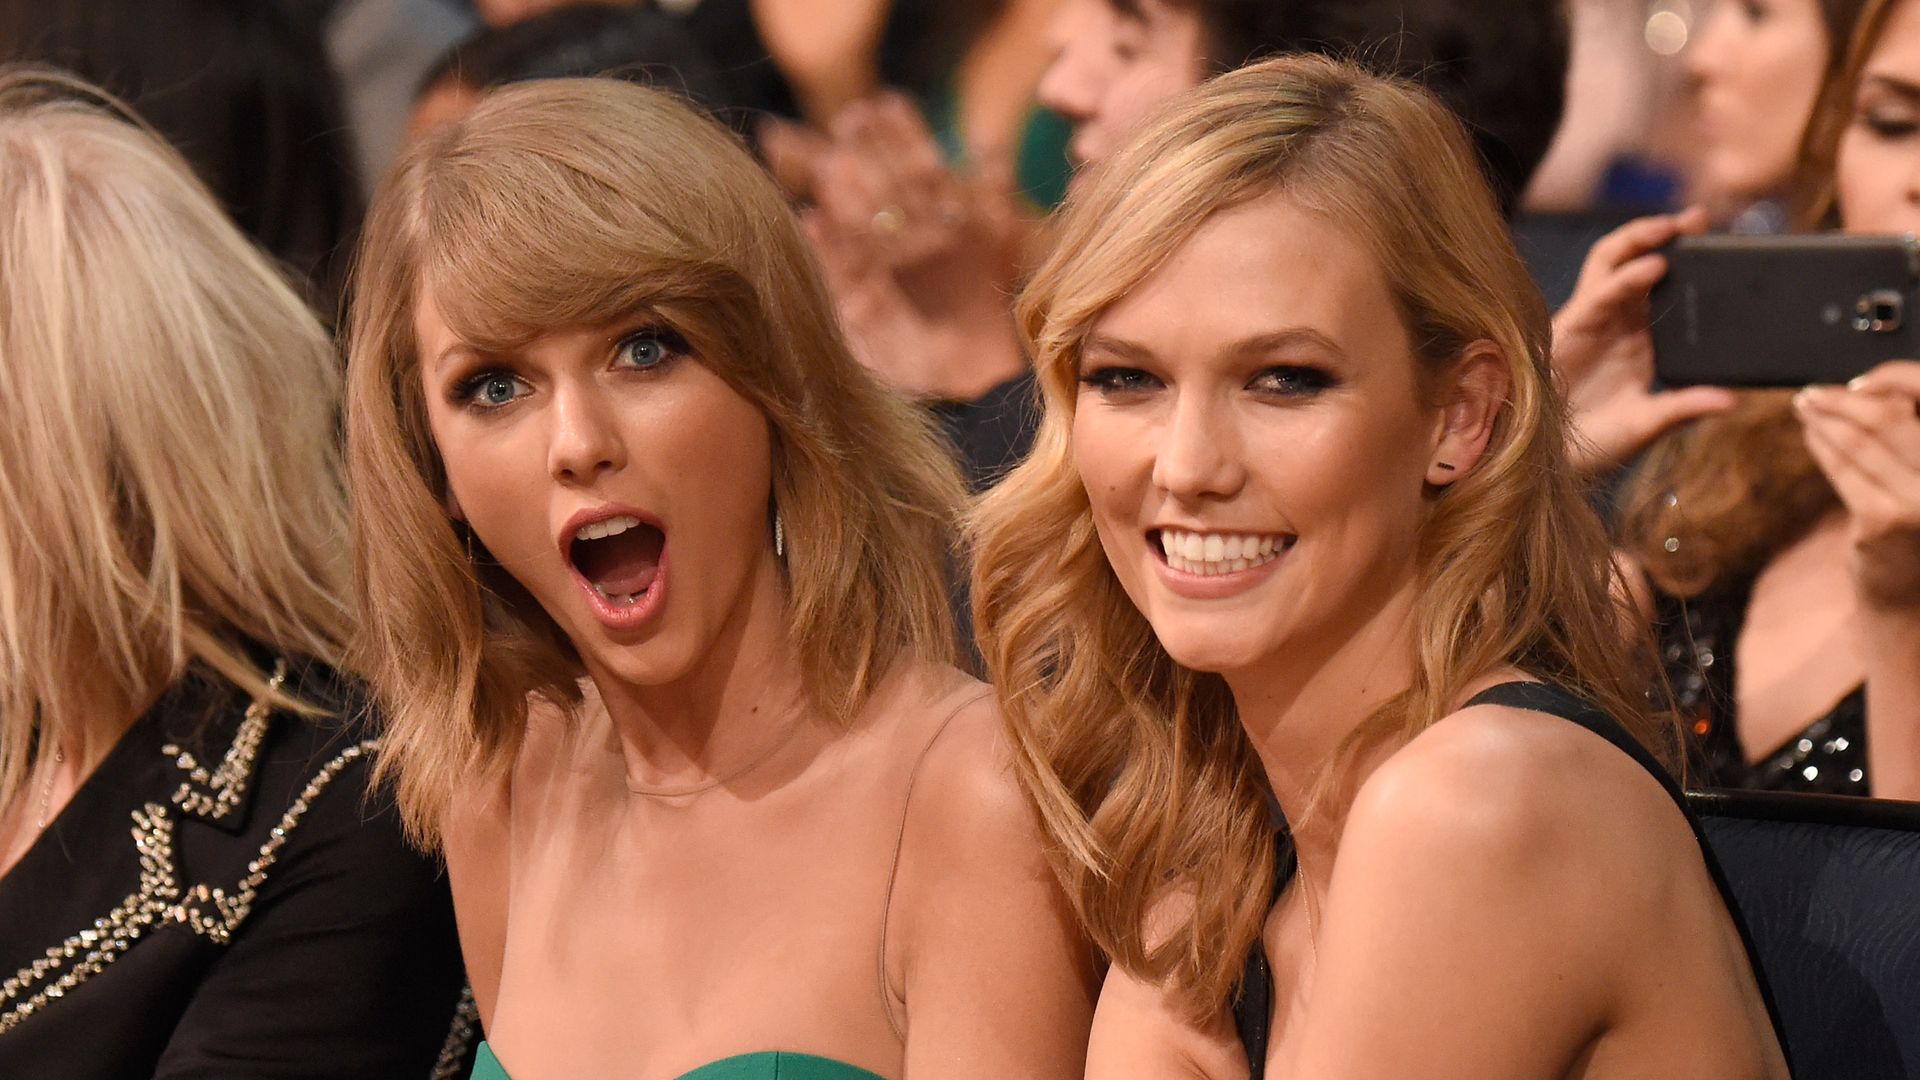 Karlie Kloss and Taylor Swift attend the 2014 American Music Awards at Nokia Theatre